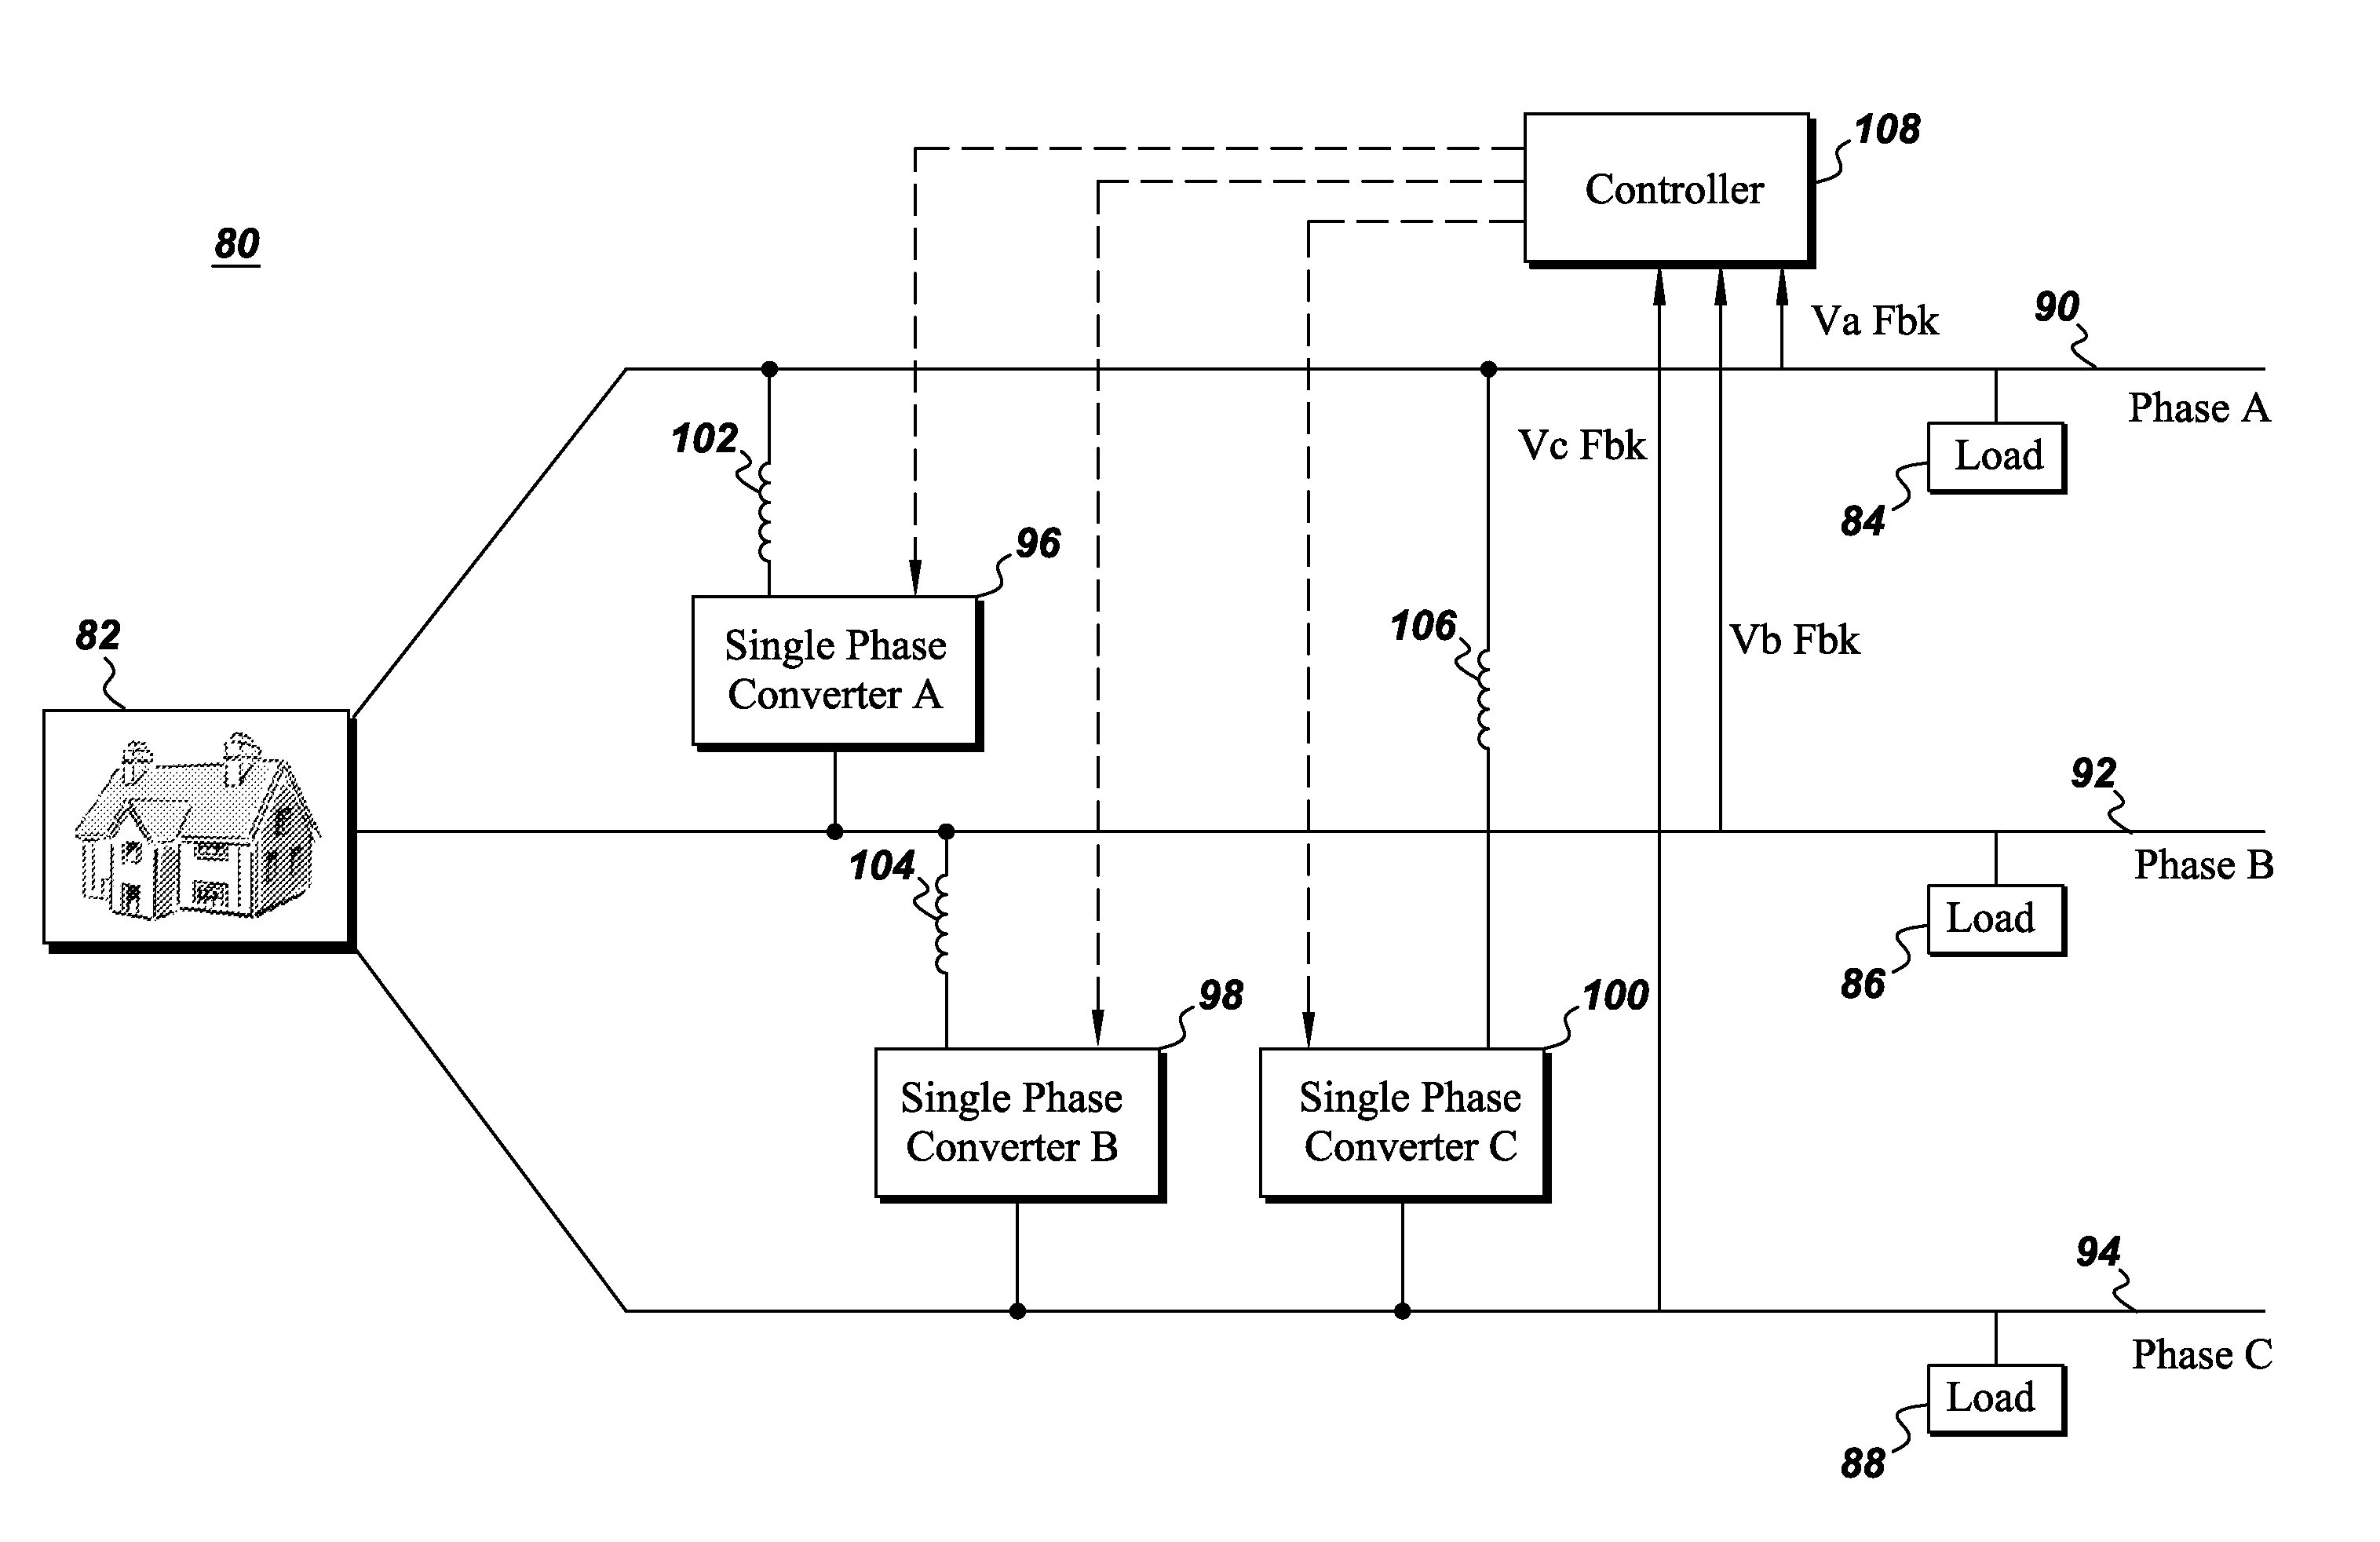 Power quality management system and methods of controlling phase unbalance